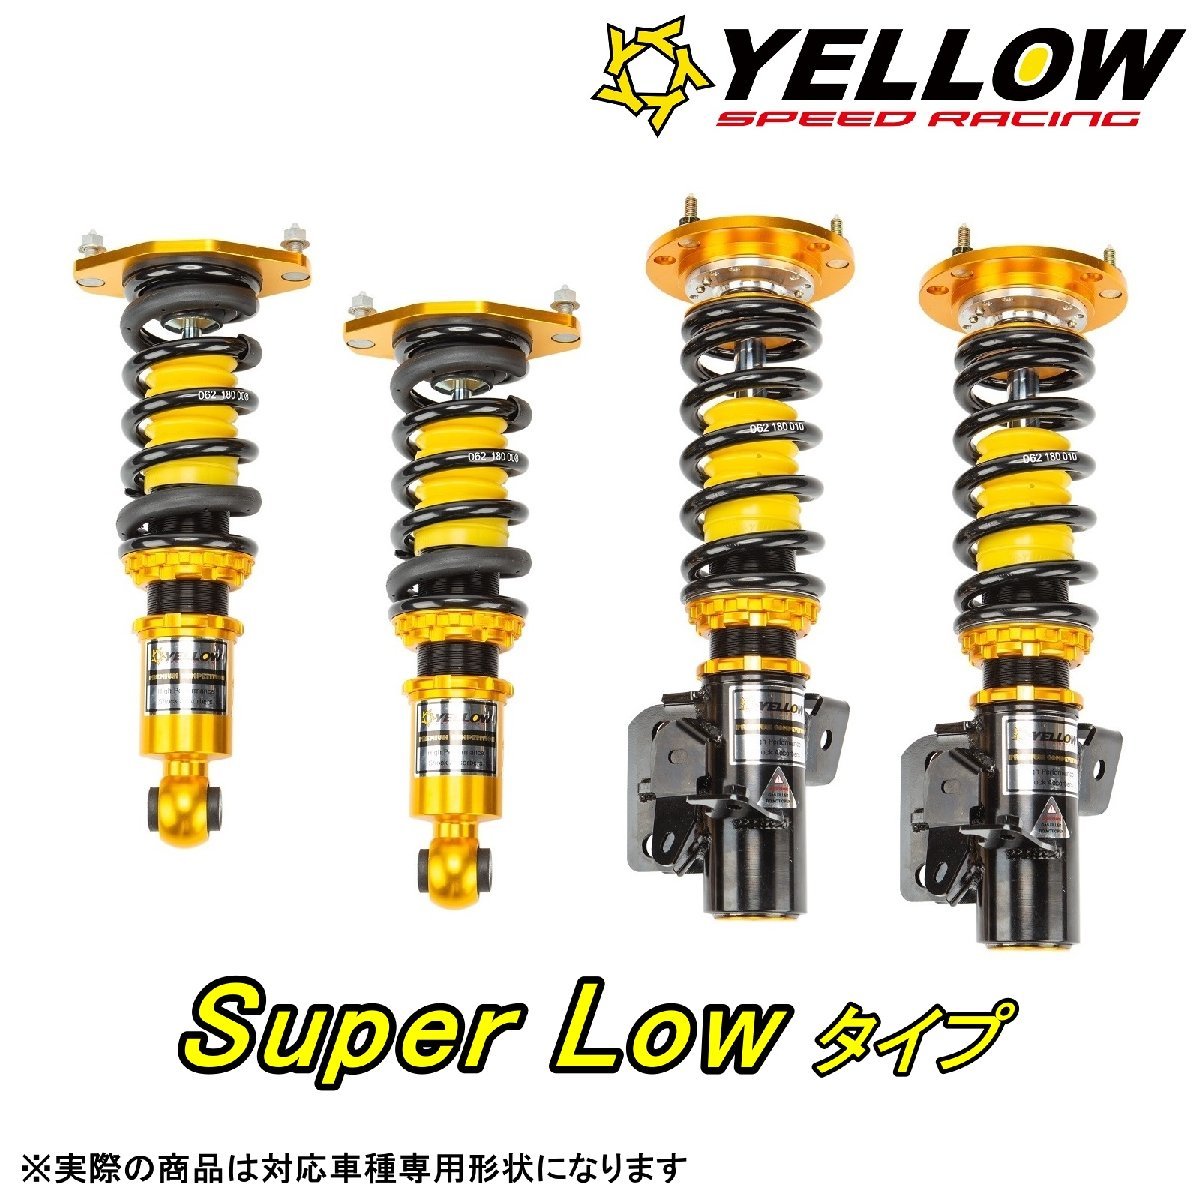  shock absorber BMW 1 series F20 F21 11-19 total length adjustment suspension 33 step attenuation YELLOWSPEED SPL type 